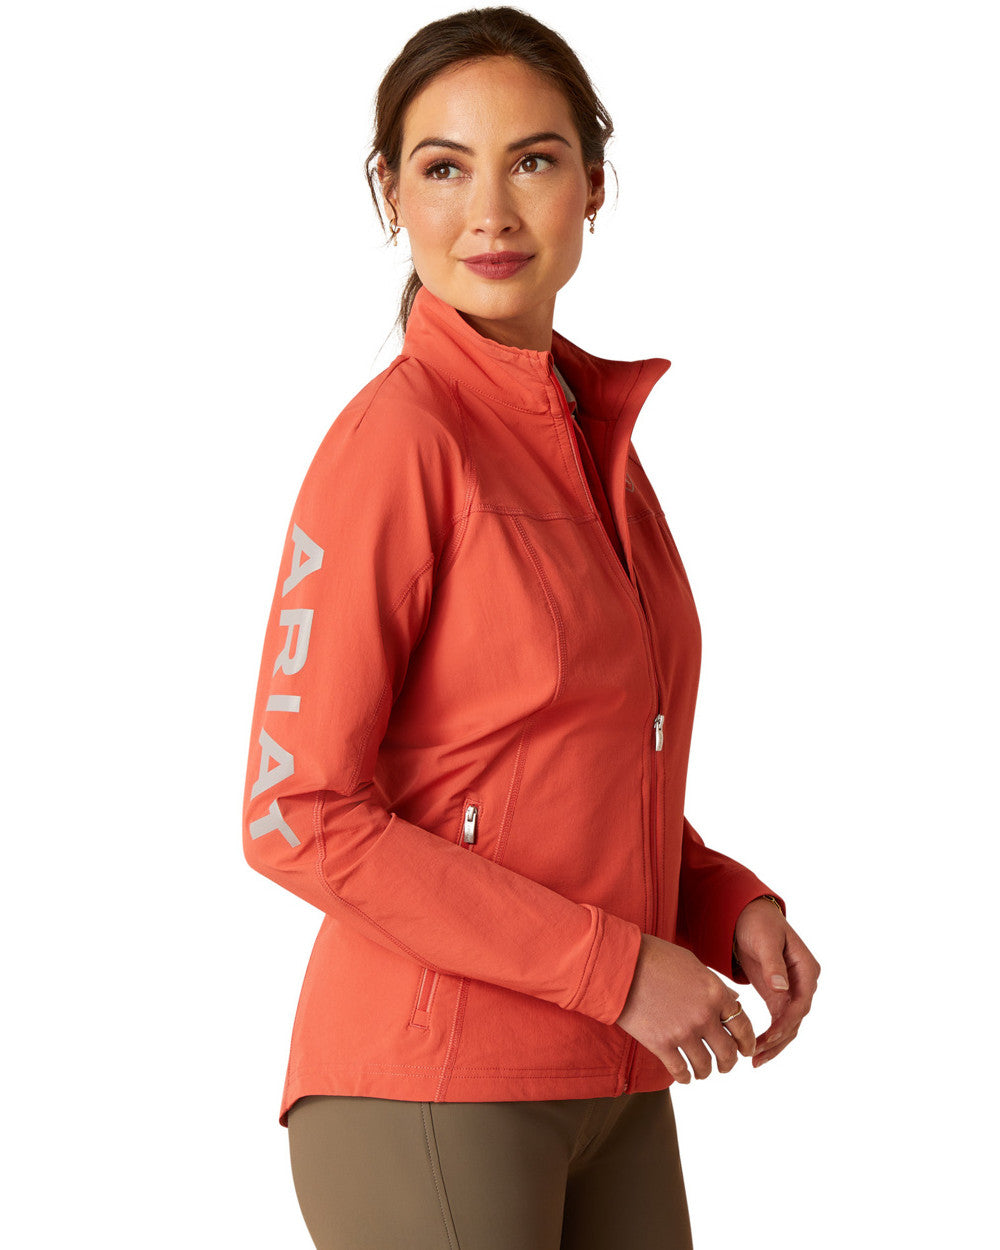 Baked Apple Coloured Ariat Womens Agile Softshell Jacket On A White Background 